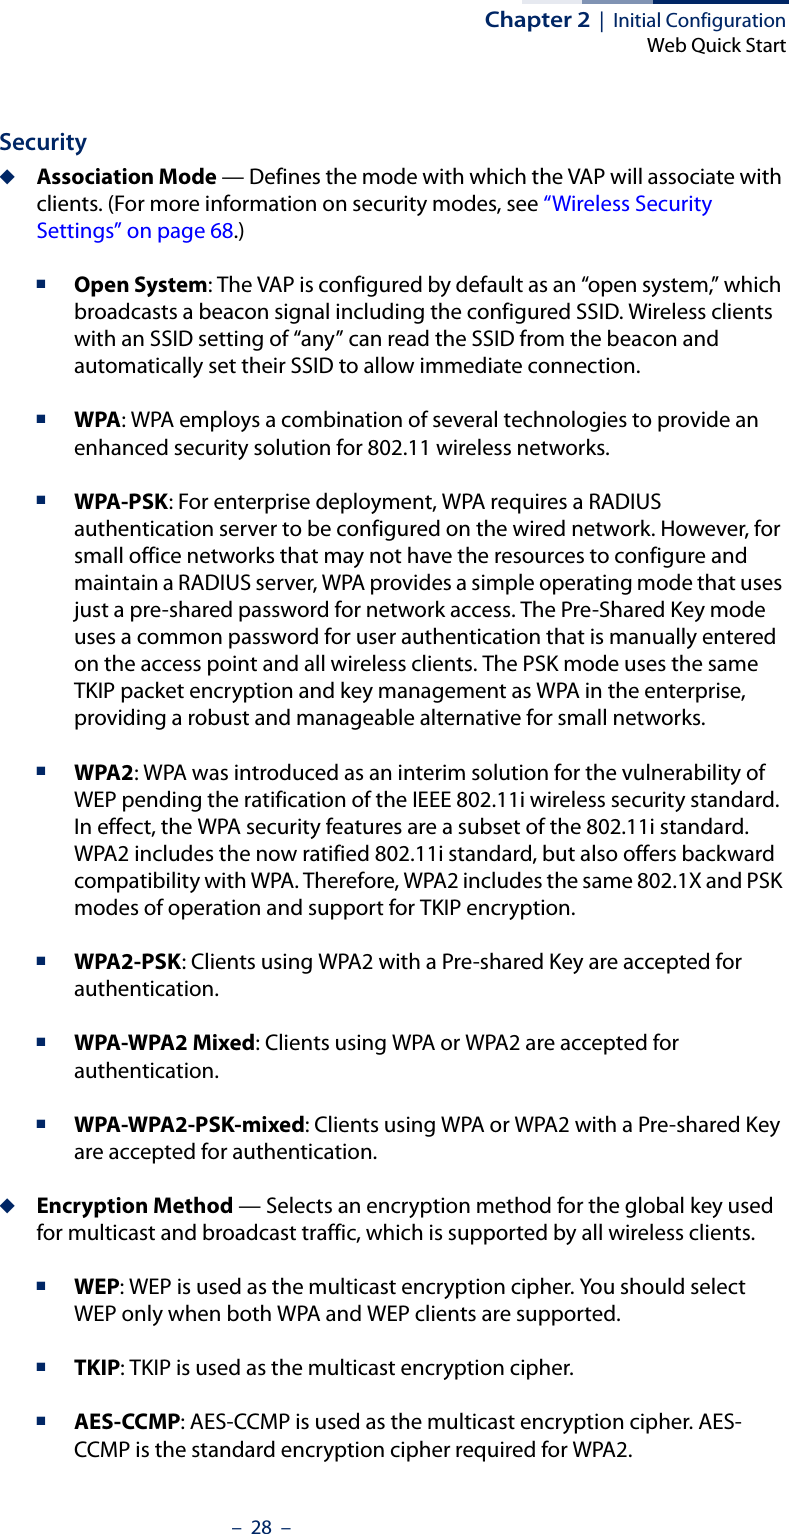 Chapter 2  |  Initial ConfigurationWeb Quick Start–  28  –Security◆Association Mode — Defines the mode with which the VAP will associate with clients. (For more information on security modes, see “Wireless Security Settings” on page 68.)■Open System: The VAP is configured by default as an “open system,” which broadcasts a beacon signal including the configured SSID. Wireless clients with an SSID setting of “any” can read the SSID from the beacon and automatically set their SSID to allow immediate connection. ■WPA: WPA employs a combination of several technologies to provide an enhanced security solution for 802.11 wireless networks.■WPA-PSK: For enterprise deployment, WPA requires a RADIUS authentication server to be configured on the wired network. However, for small office networks that may not have the resources to configure and maintain a RADIUS server, WPA provides a simple operating mode that uses just a pre-shared password for network access. The Pre-Shared Key mode uses a common password for user authentication that is manually entered on the access point and all wireless clients. The PSK mode uses the same TKIP packet encryption and key management as WPA in the enterprise, providing a robust and manageable alternative for small networks.■WPA2: WPA was introduced as an interim solution for the vulnerability of WEP pending the ratification of the IEEE 802.11i wireless security standard. In effect, the WPA security features are a subset of the 802.11i standard. WPA2 includes the now ratified 802.11i standard, but also offers backward compatibility with WPA. Therefore, WPA2 includes the same 802.1X and PSK modes of operation and support for TKIP encryption. ■WPA2-PSK: Clients using WPA2 with a Pre-shared Key are accepted for authentication.■WPA-WPA2 Mixed: Clients using WPA or WPA2 are accepted for authentication.■WPA-WPA2-PSK-mixed: Clients using WPA or WPA2 with a Pre-shared Key are accepted for authentication.◆Encryption Method — Selects an encryption method for the global key used for multicast and broadcast traffic, which is supported by all wireless clients.■WEP: WEP is used as the multicast encryption cipher. You should select WEP only when both WPA and WEP clients are supported. ■TKIP: TKIP is used as the multicast encryption cipher.■AES-CCMP: AES-CCMP is used as the multicast encryption cipher. AES-CCMP is the standard encryption cipher required for WPA2.